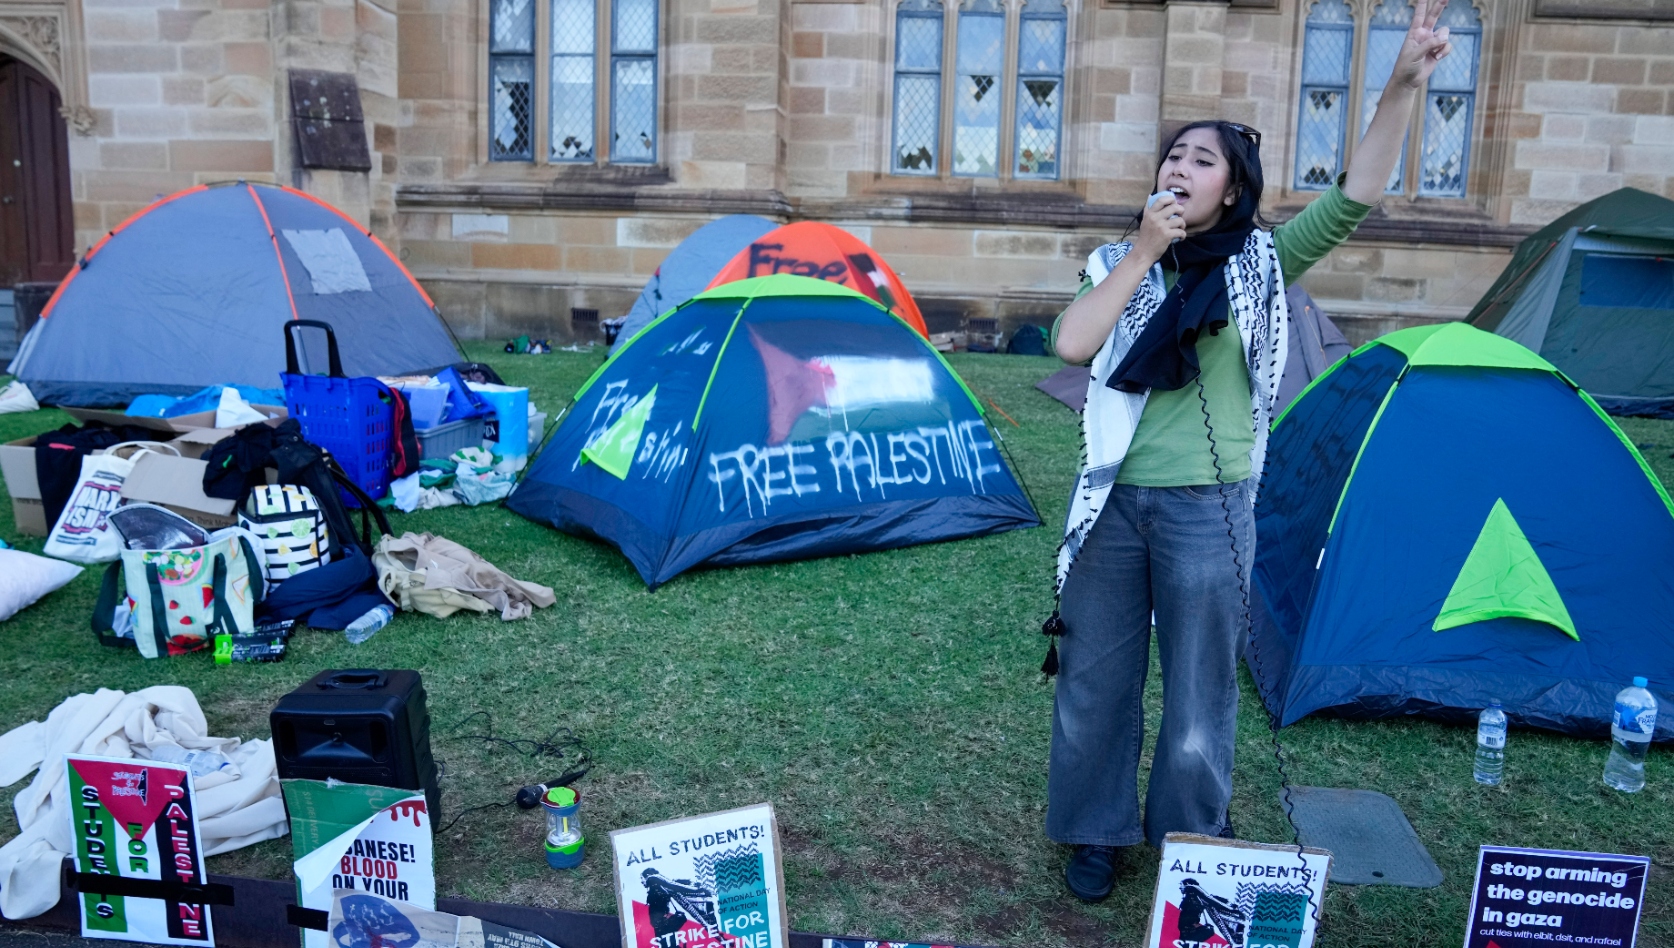 From USyd to the Sea: Palestine solidarity encampments are staying put